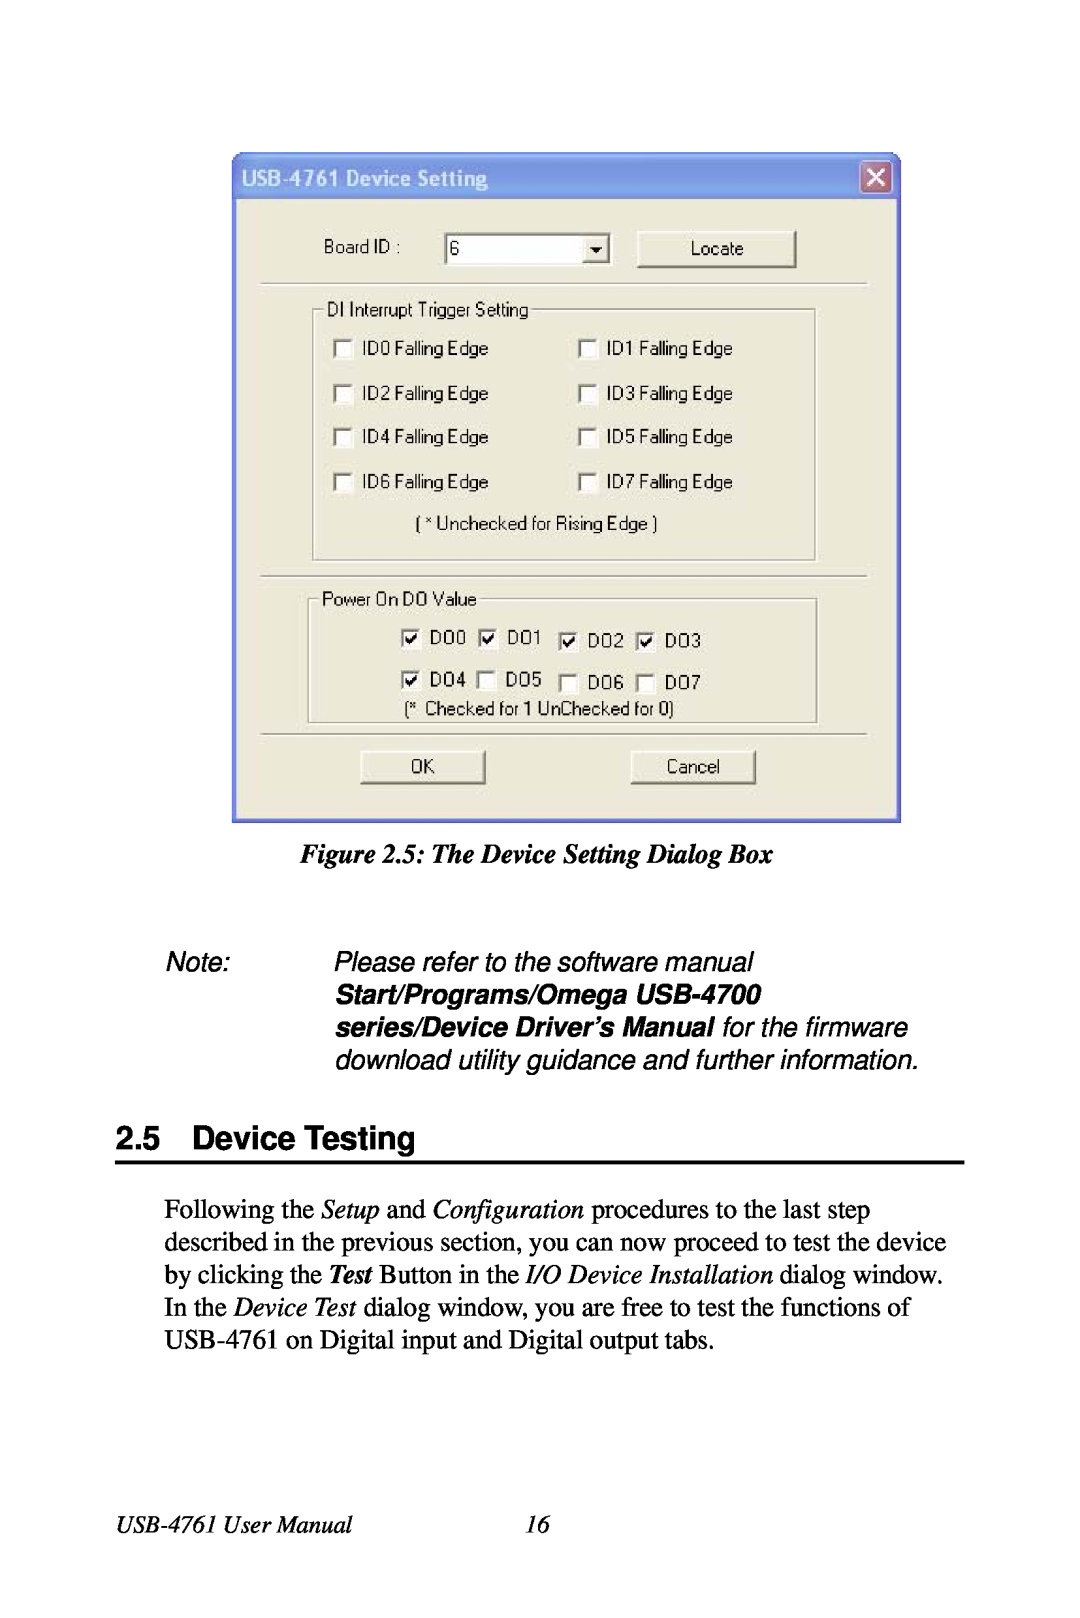 Omega Vehicle Security USB-4761 Device Testing, 5 The Device Setting Dialog Box, Please refer to the software manual 